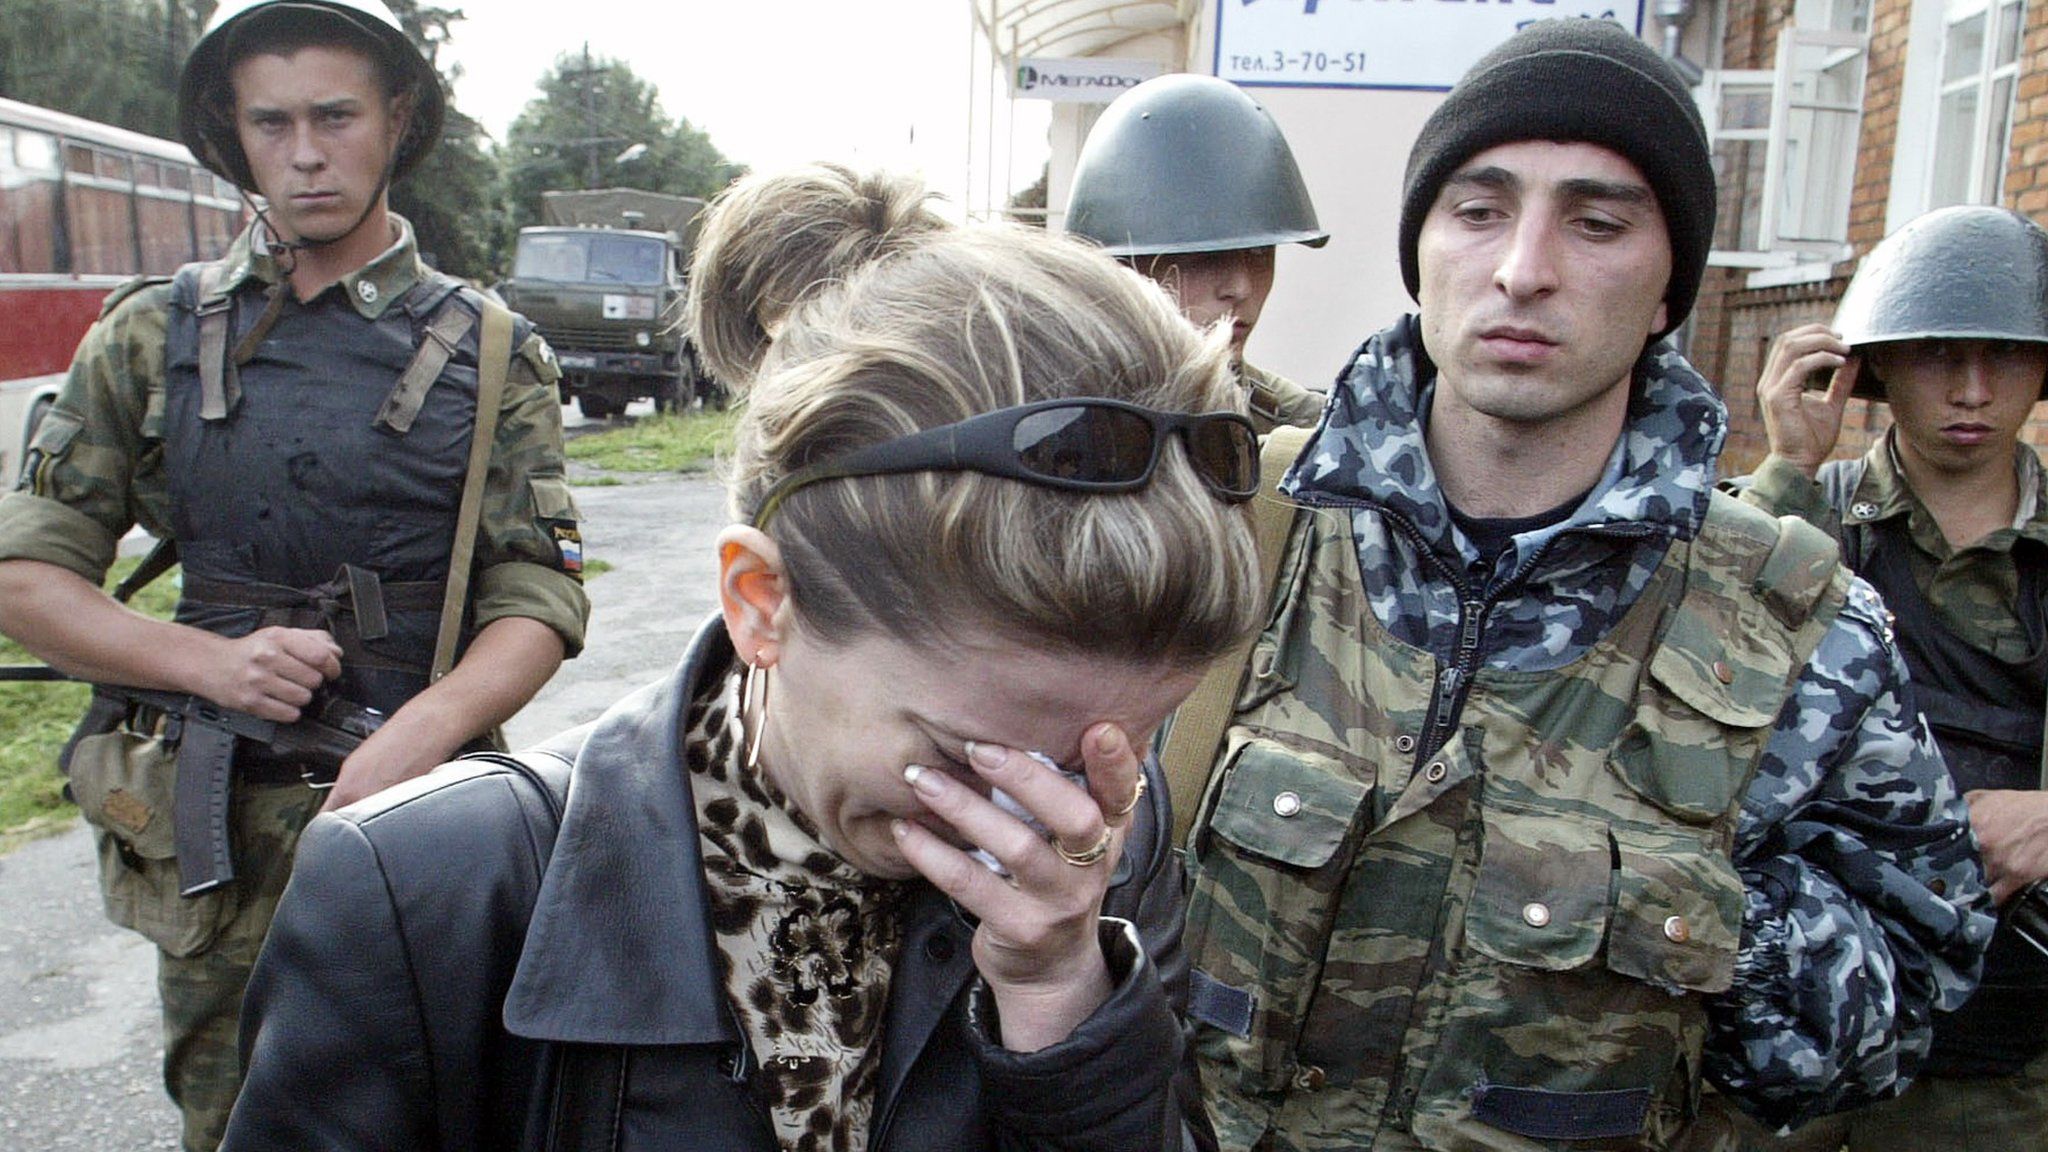 A woman cries in front of soldiers cordoning off the school building in the town of Beslan, North Ossetia, 04 September 2004